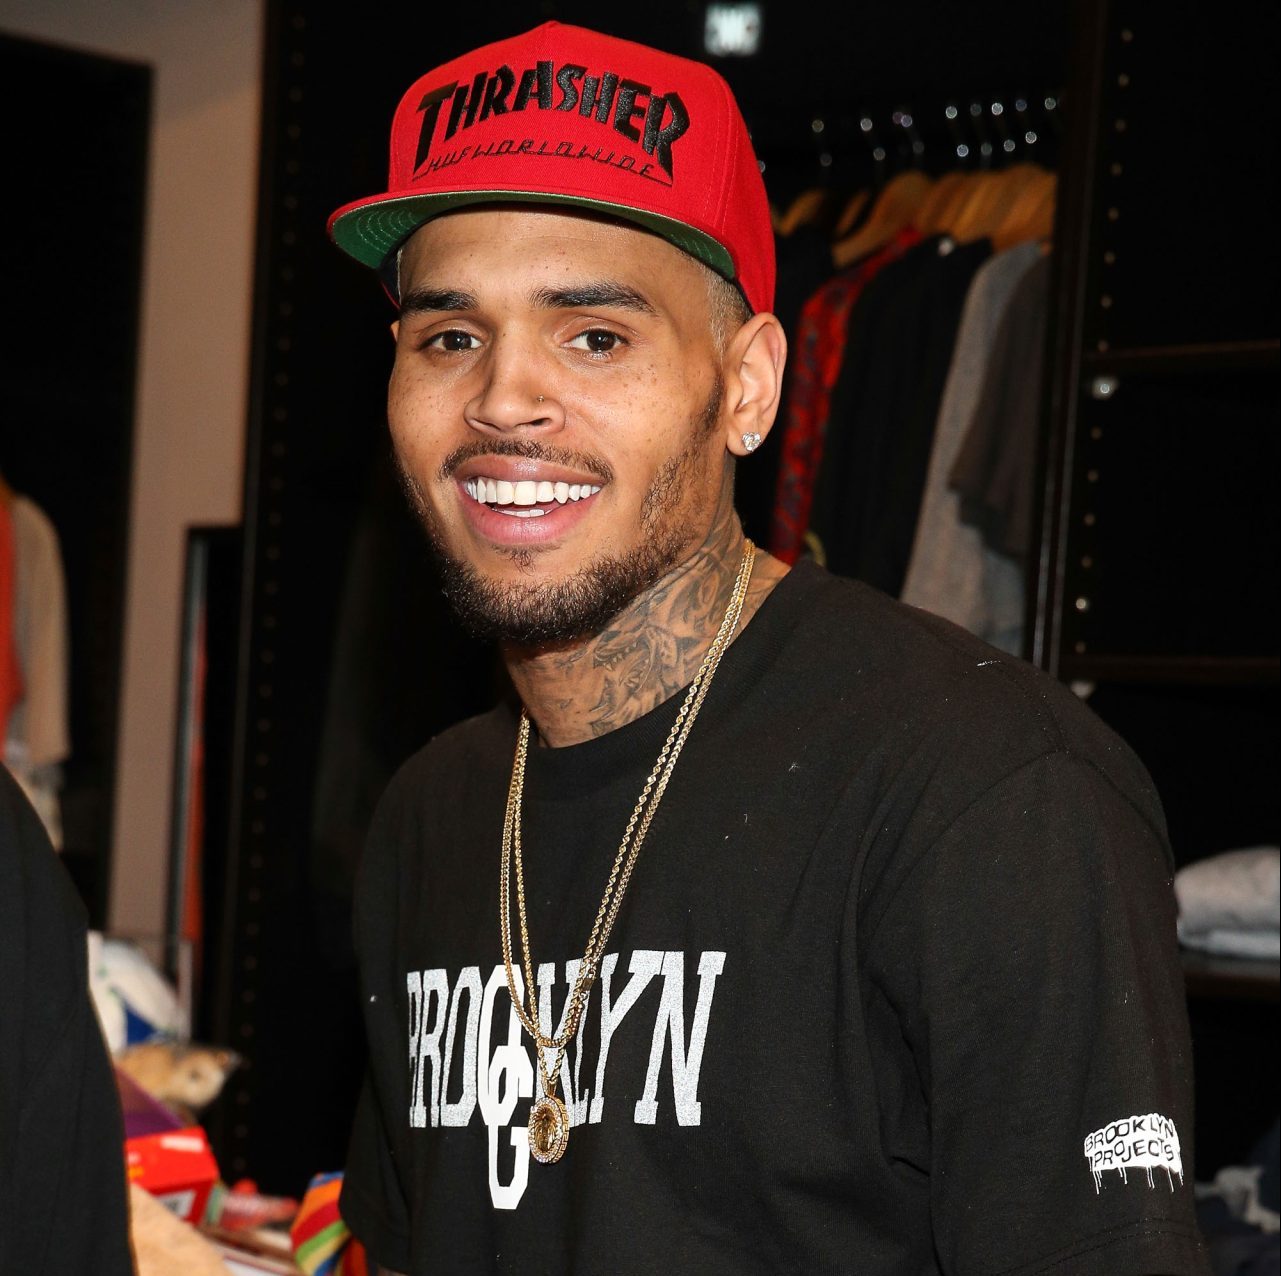 Chris Brown Shares The Tracklist For His New Album ‘Breezy’ thumbnail